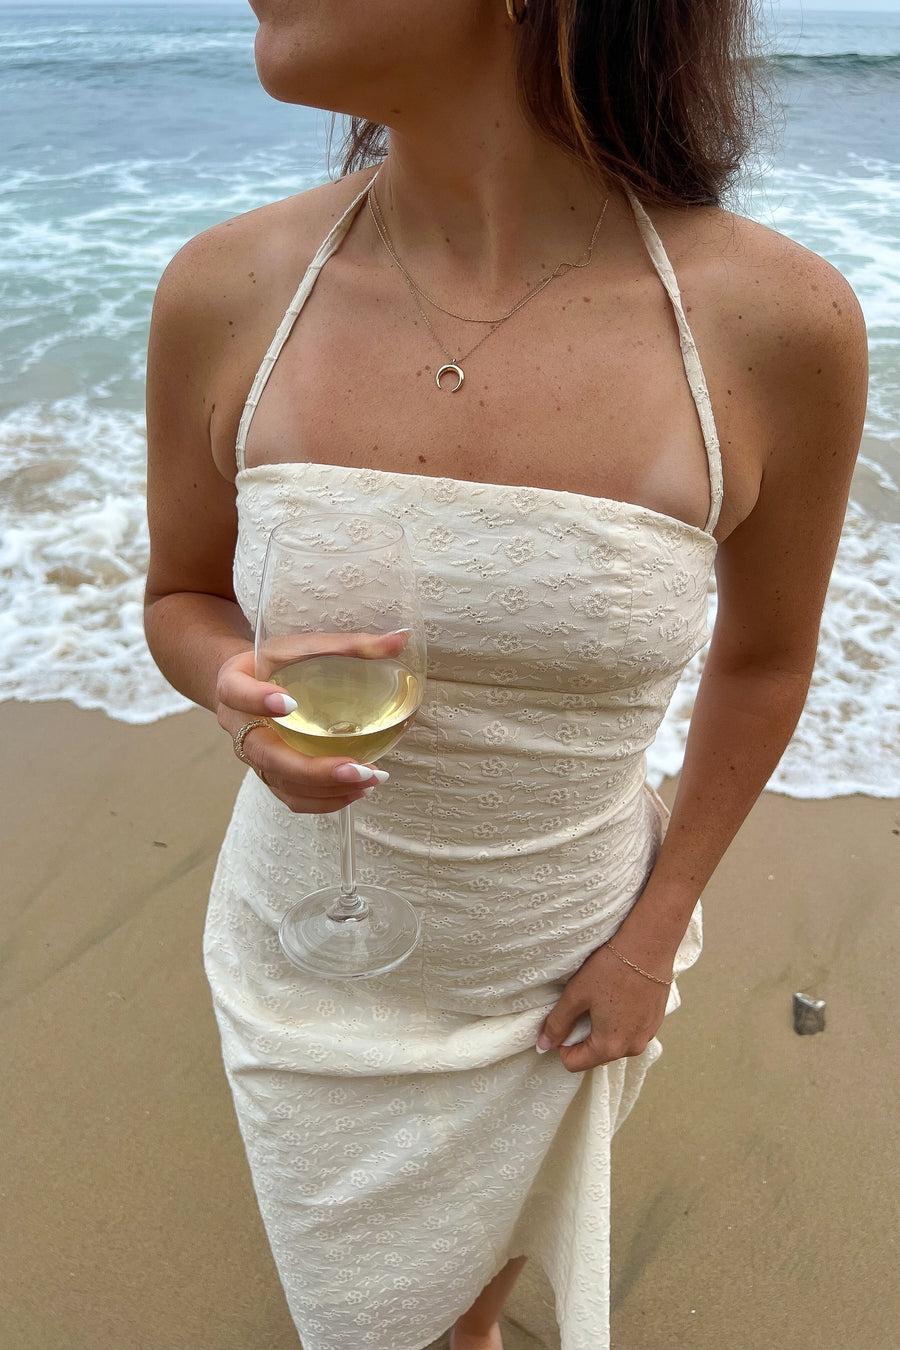 Model posing at the beach holding a wine glass.